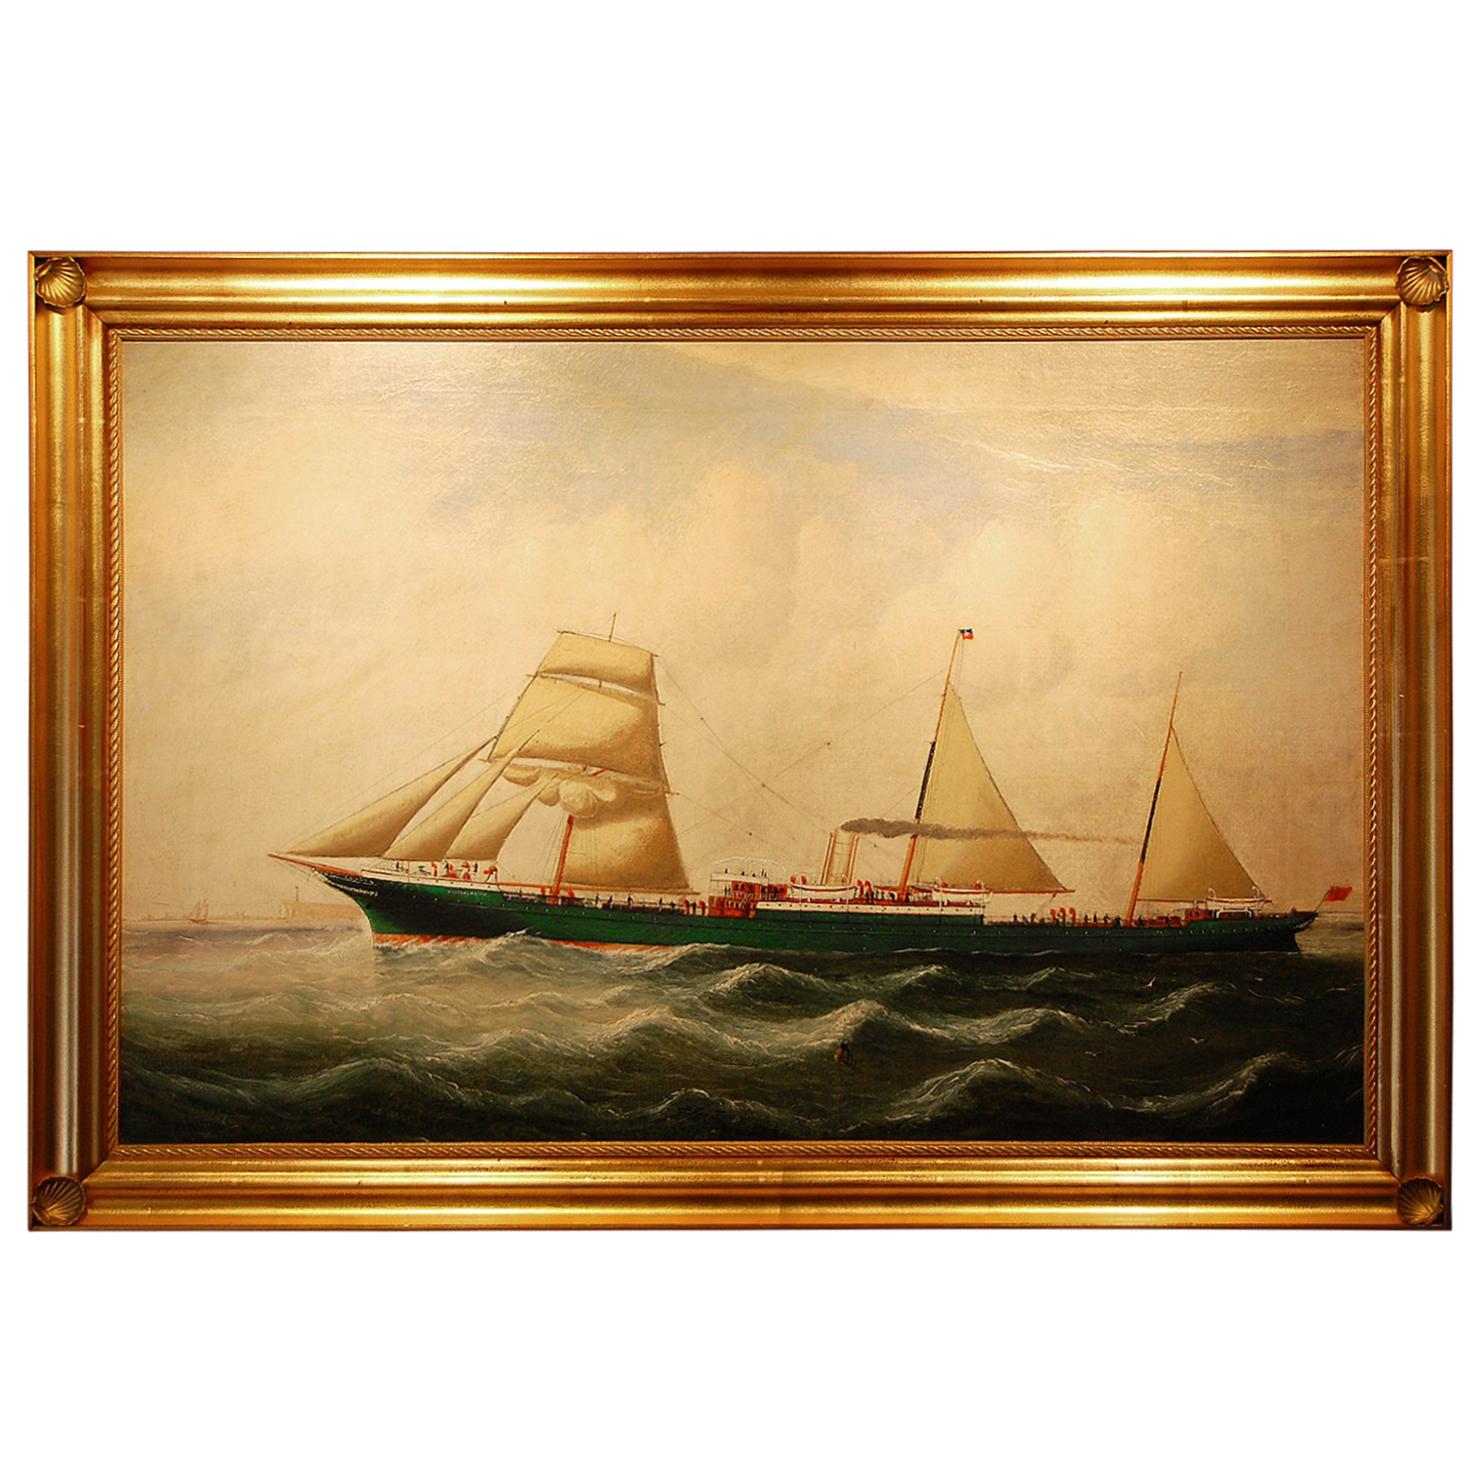 English 19th Century Signed Ship Portrait by Charles Kensington Oil on Canvas